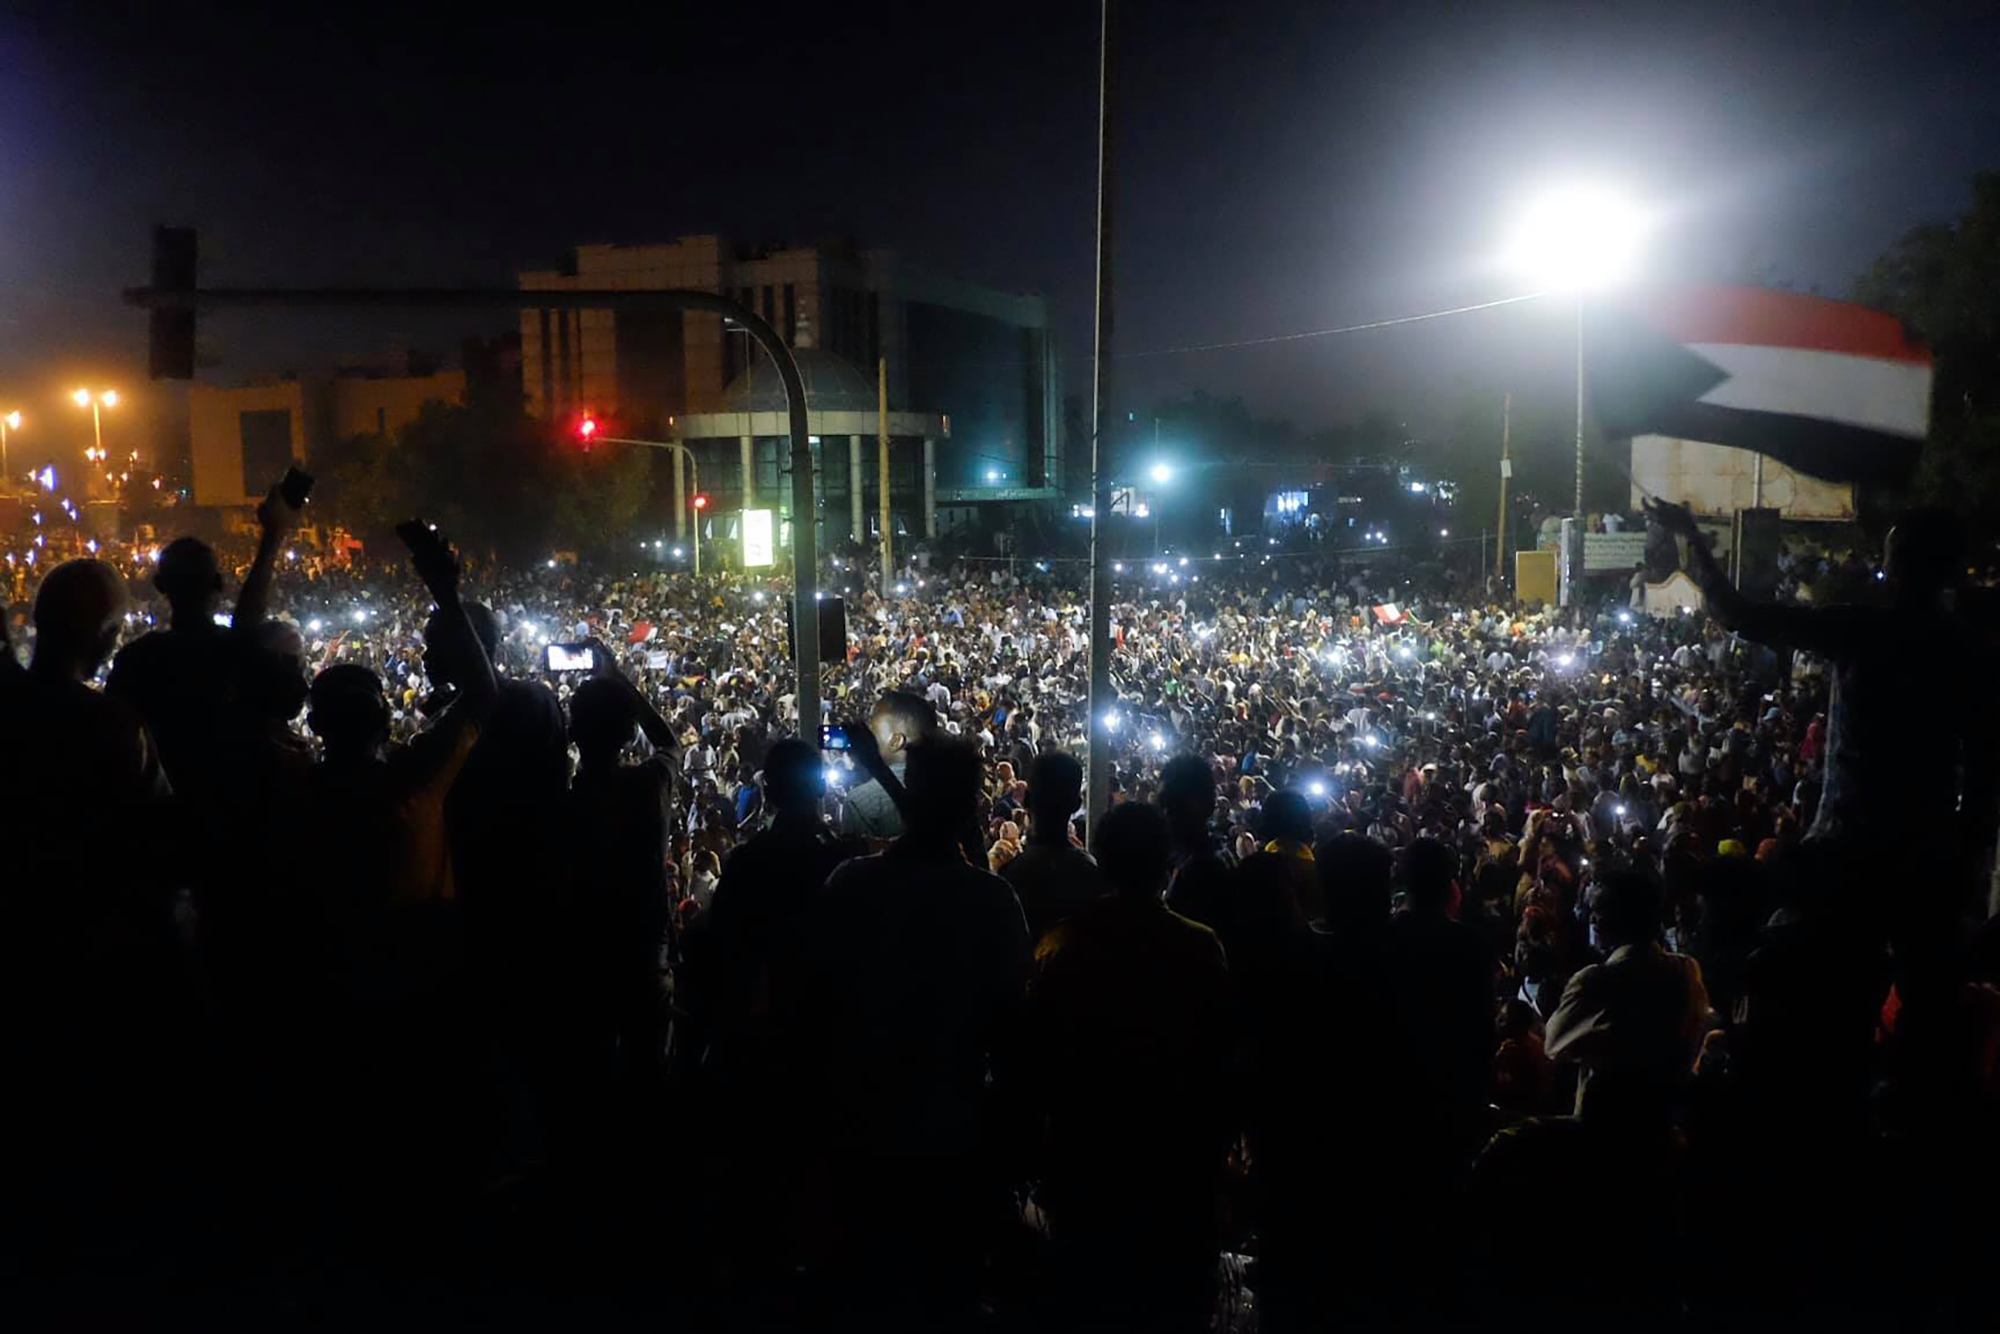 Protestors chant and rally at night in front of the the Sudanese Army headquarters in Khartoum.